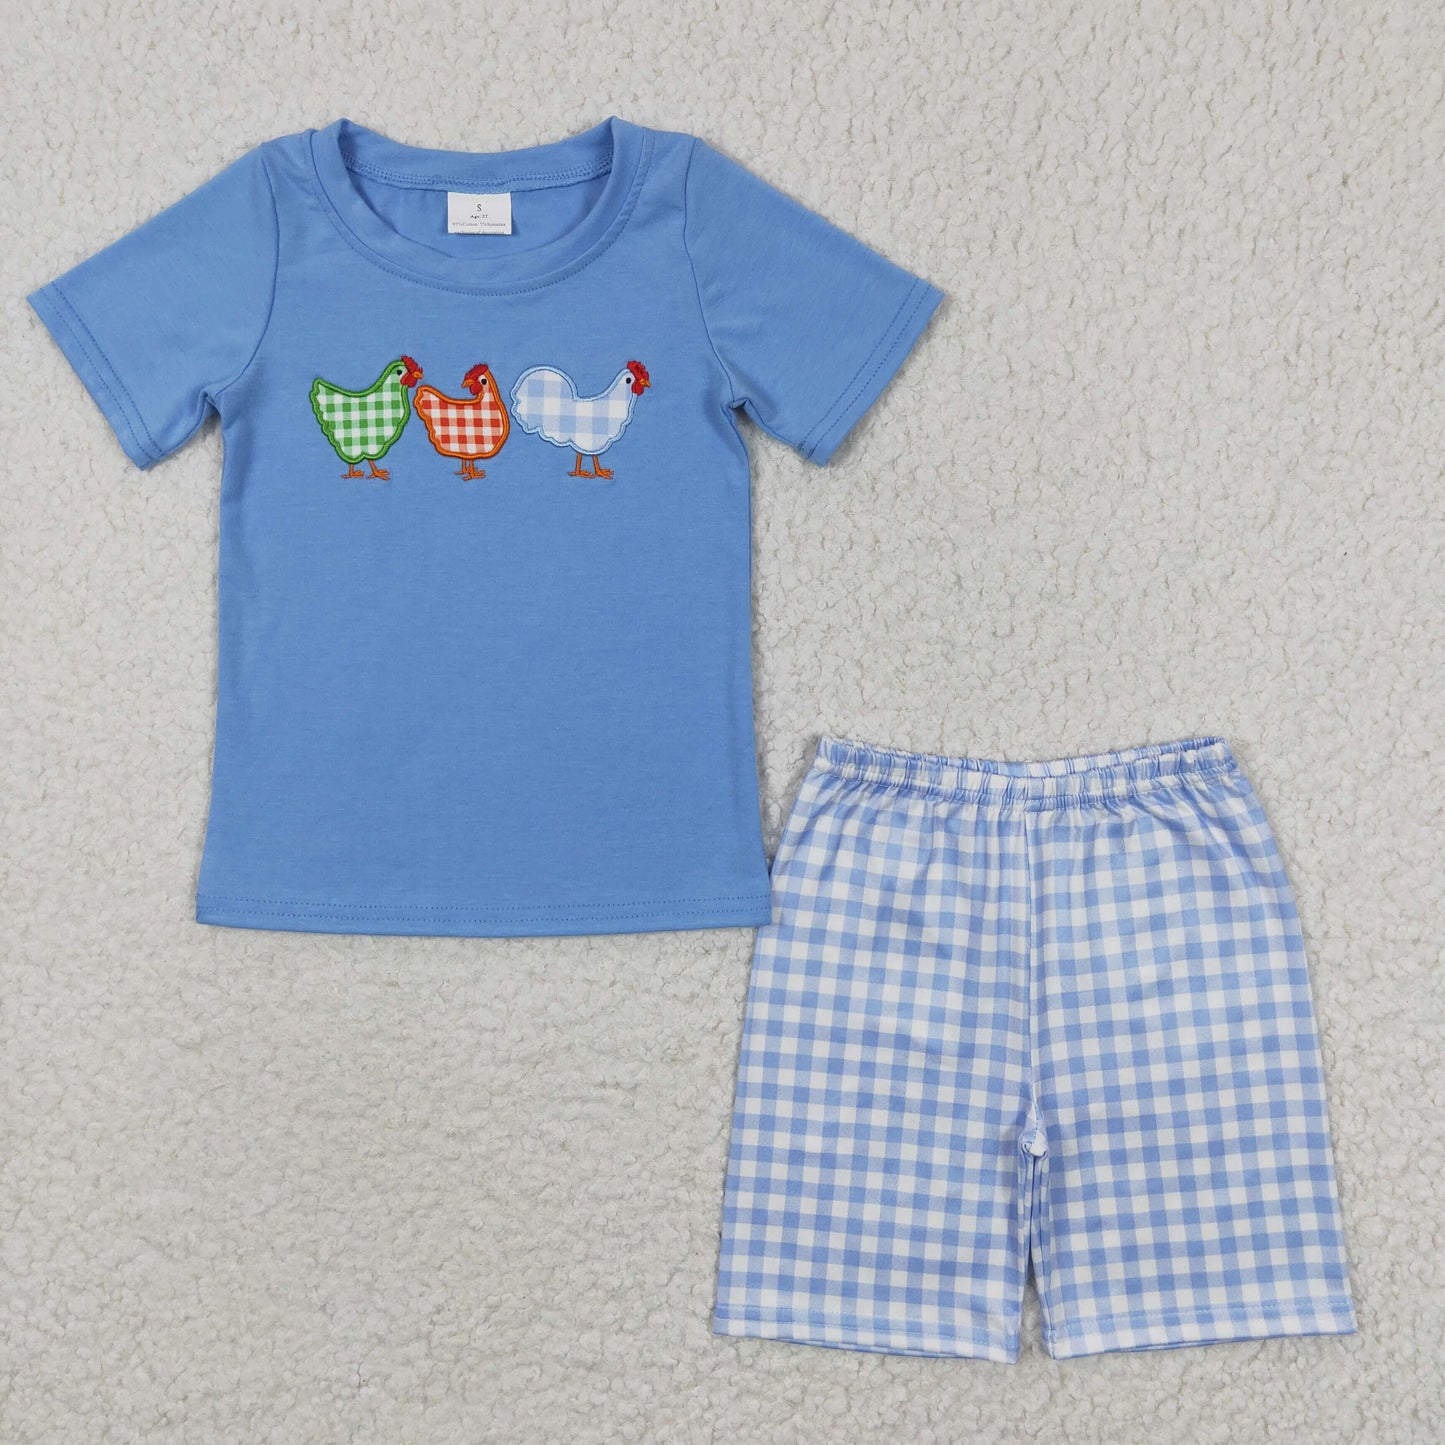 chicken embroidered shorts set boys clothing